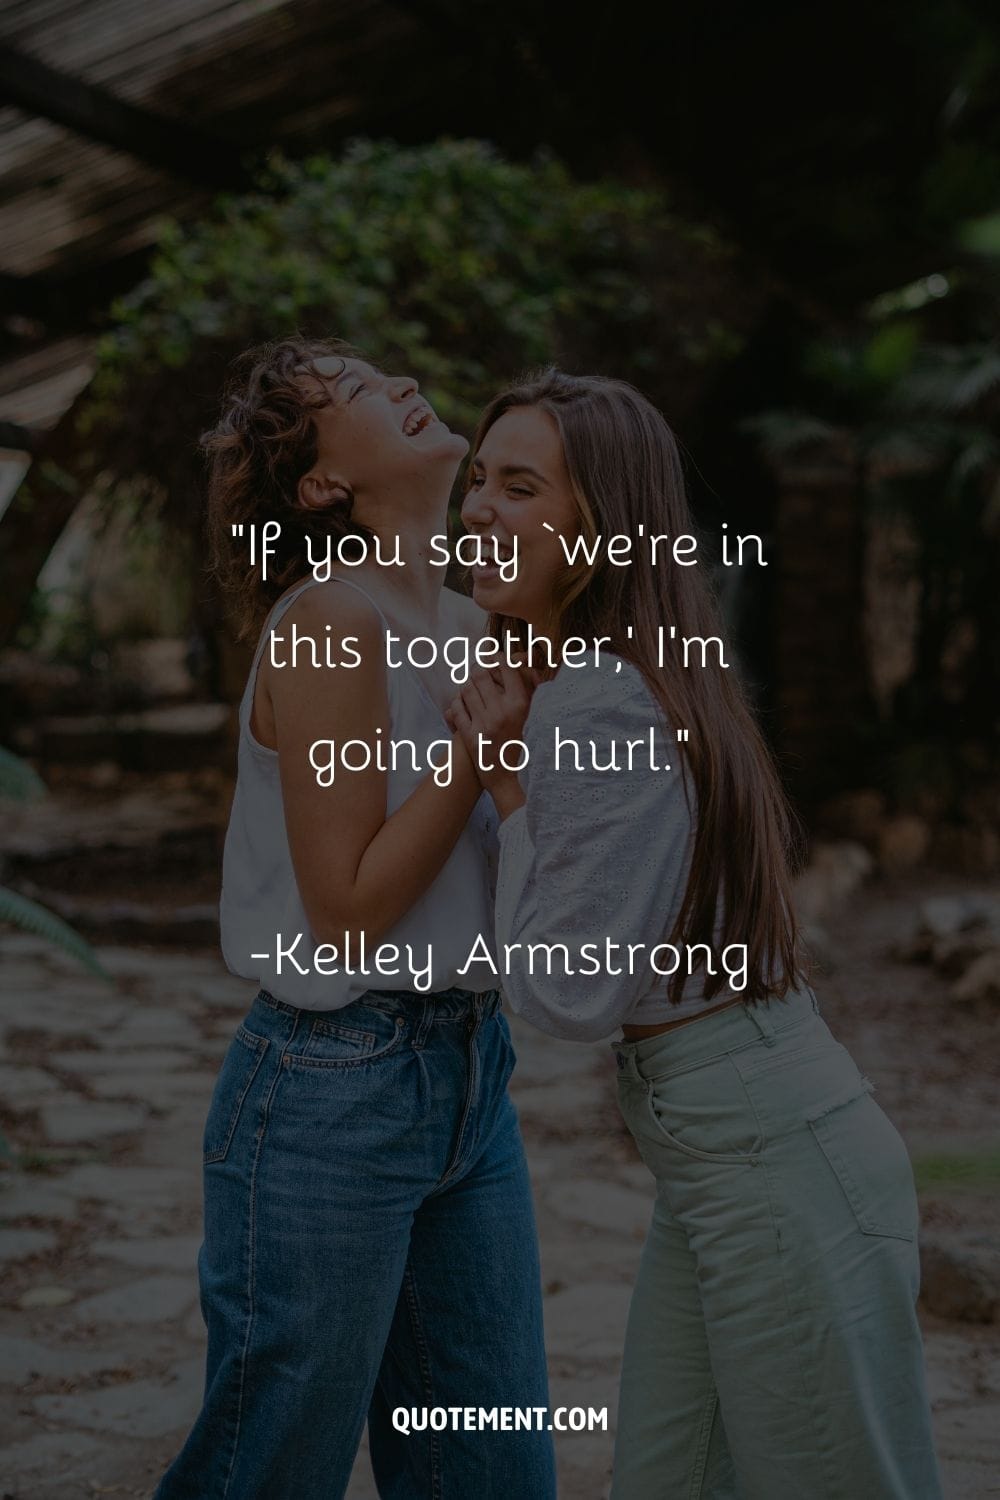 “If you say ‘we’re in this together,’ I’m going to hurl.” ― Kelley Armstrong